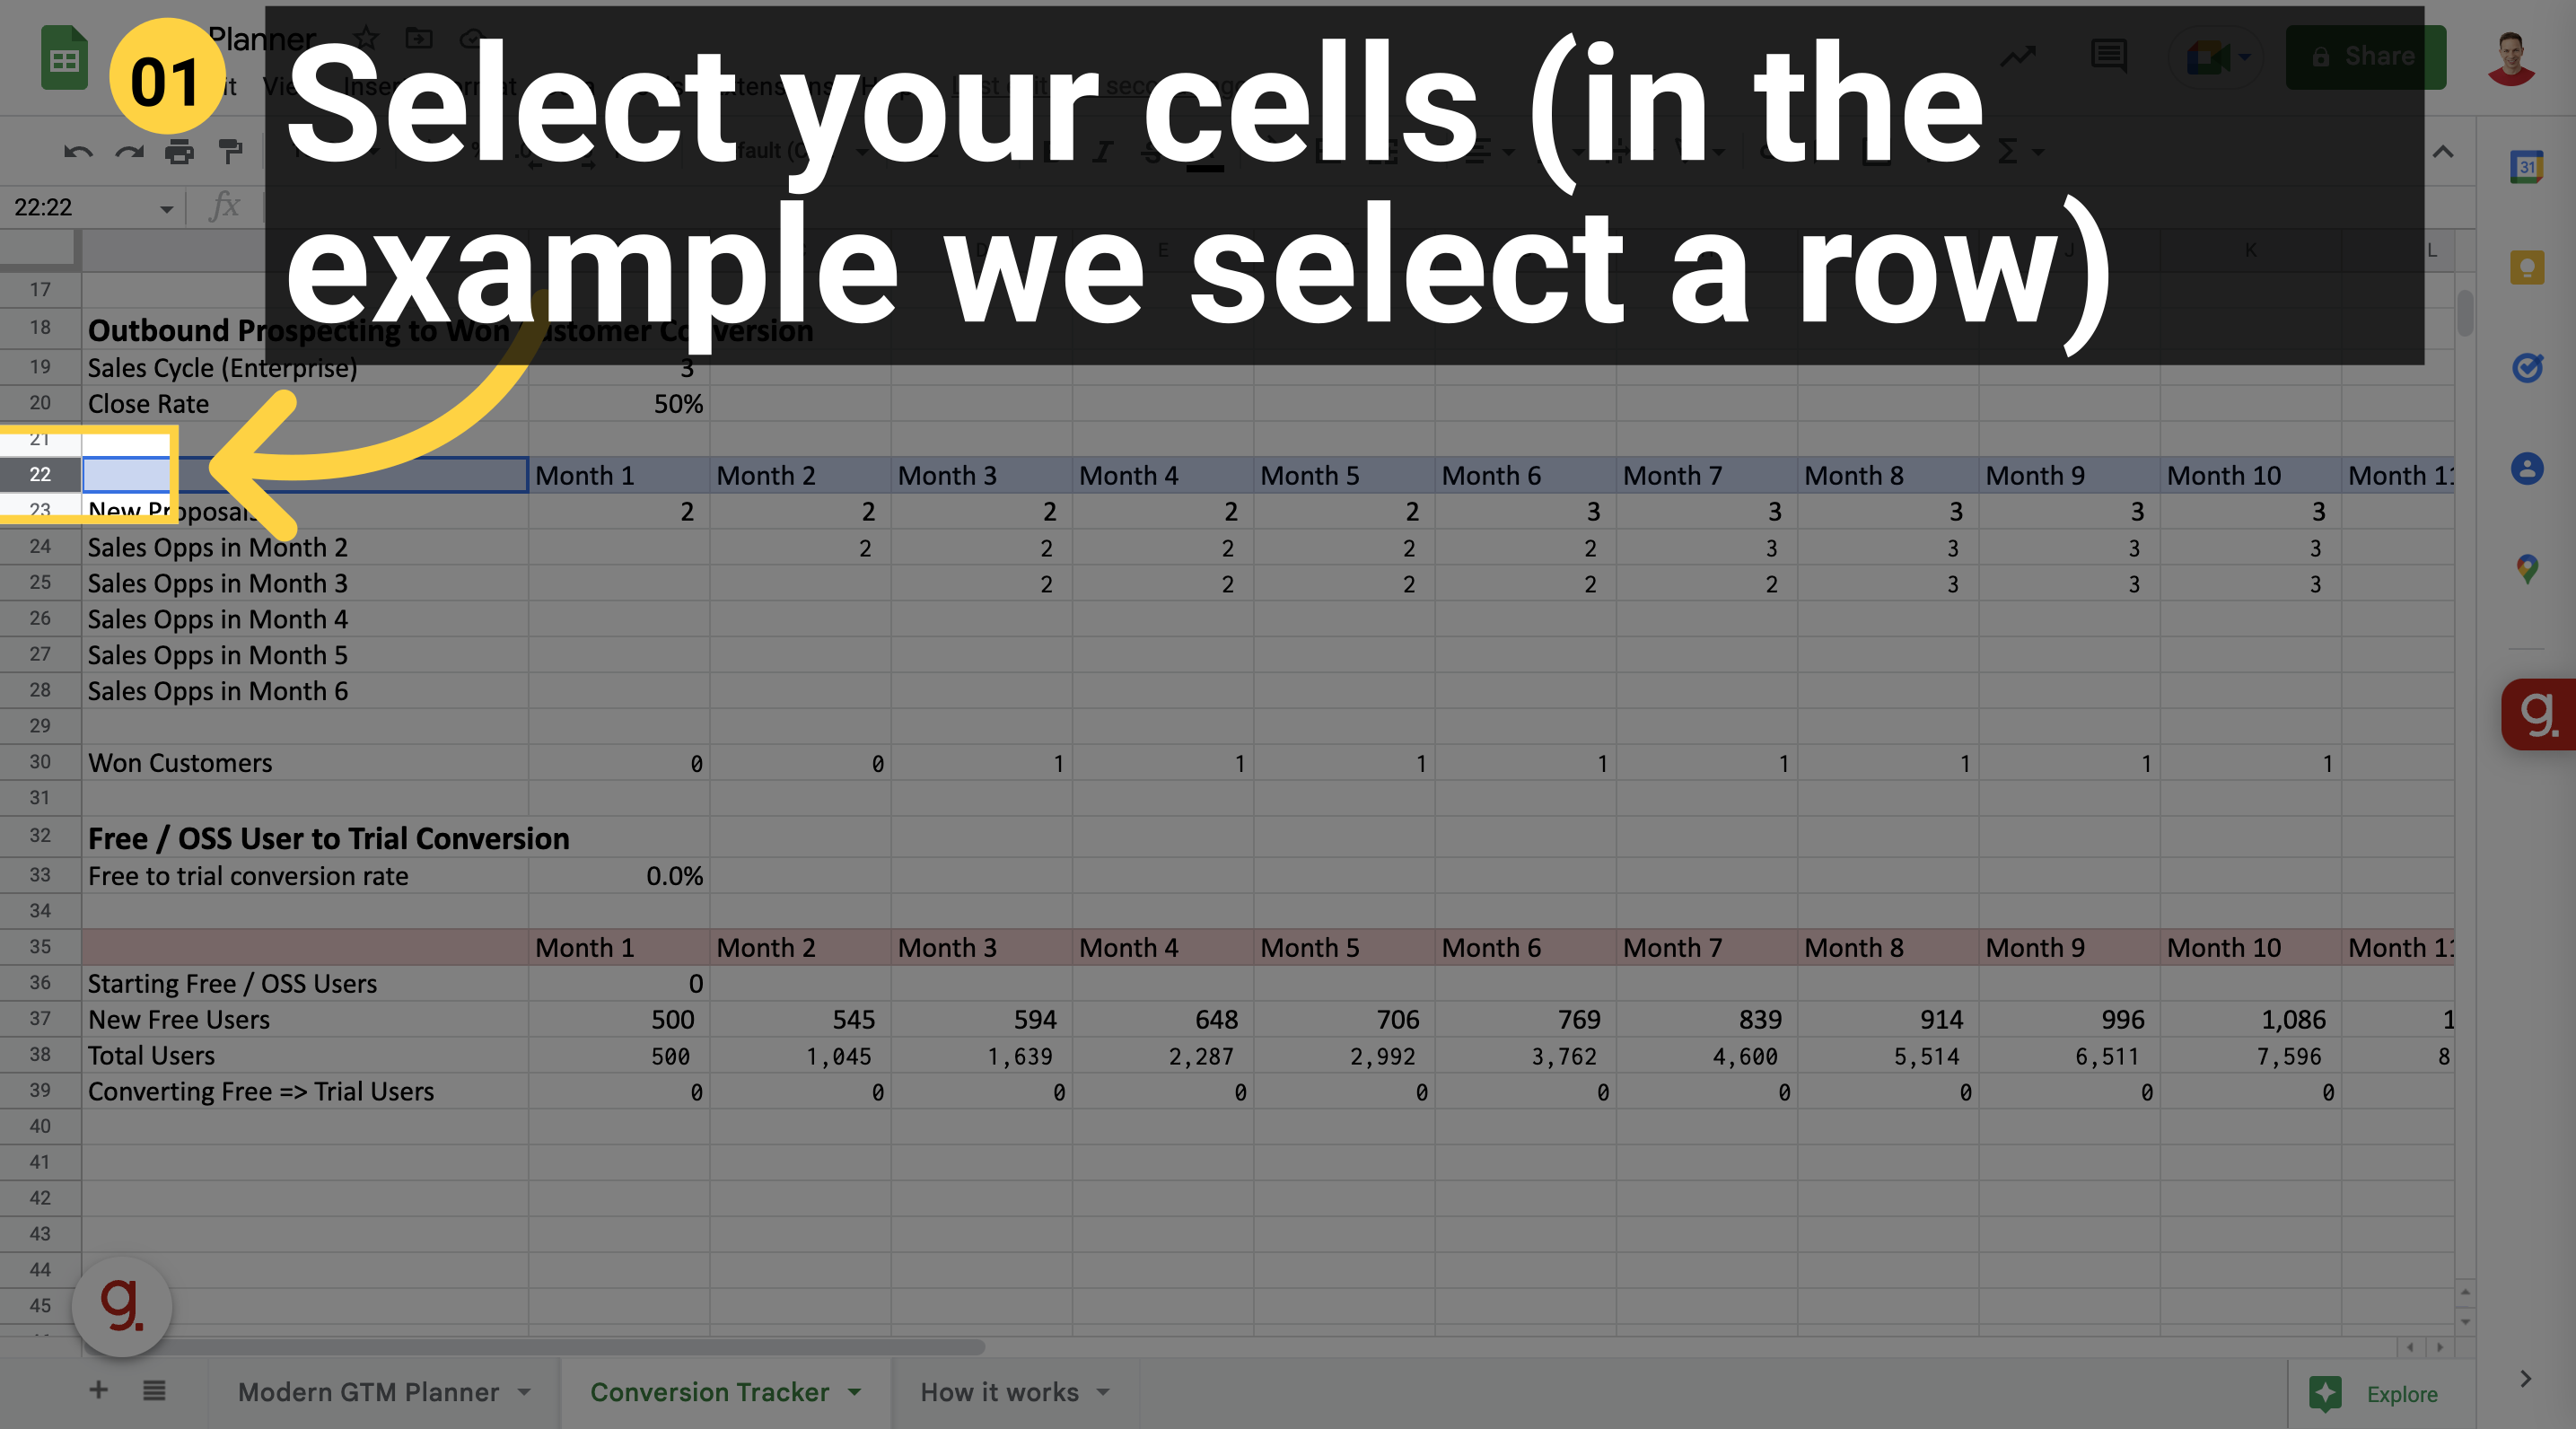 Select your cells (in the example we select a row)